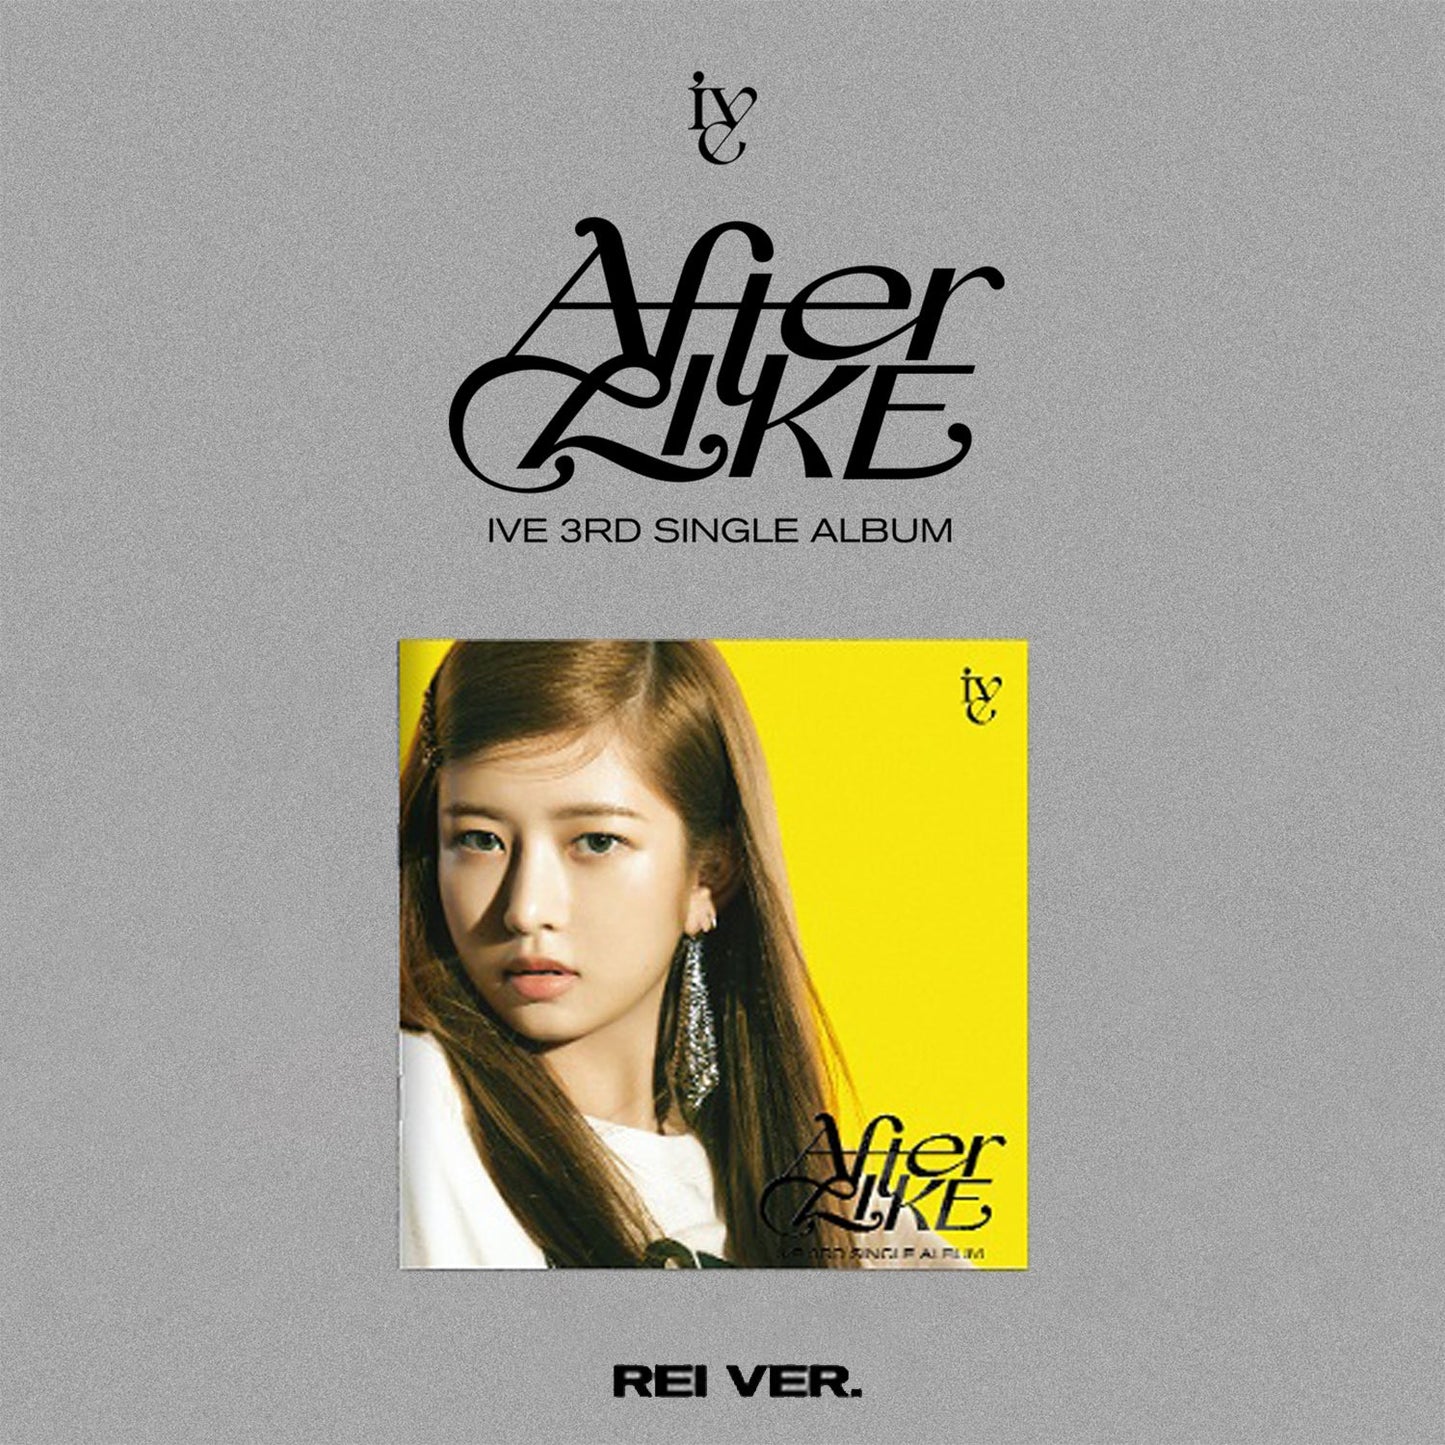 IVE 3RD SINGLE ALBUM 'AFTER LIKE' (JEWEL) REI VERSION COVER